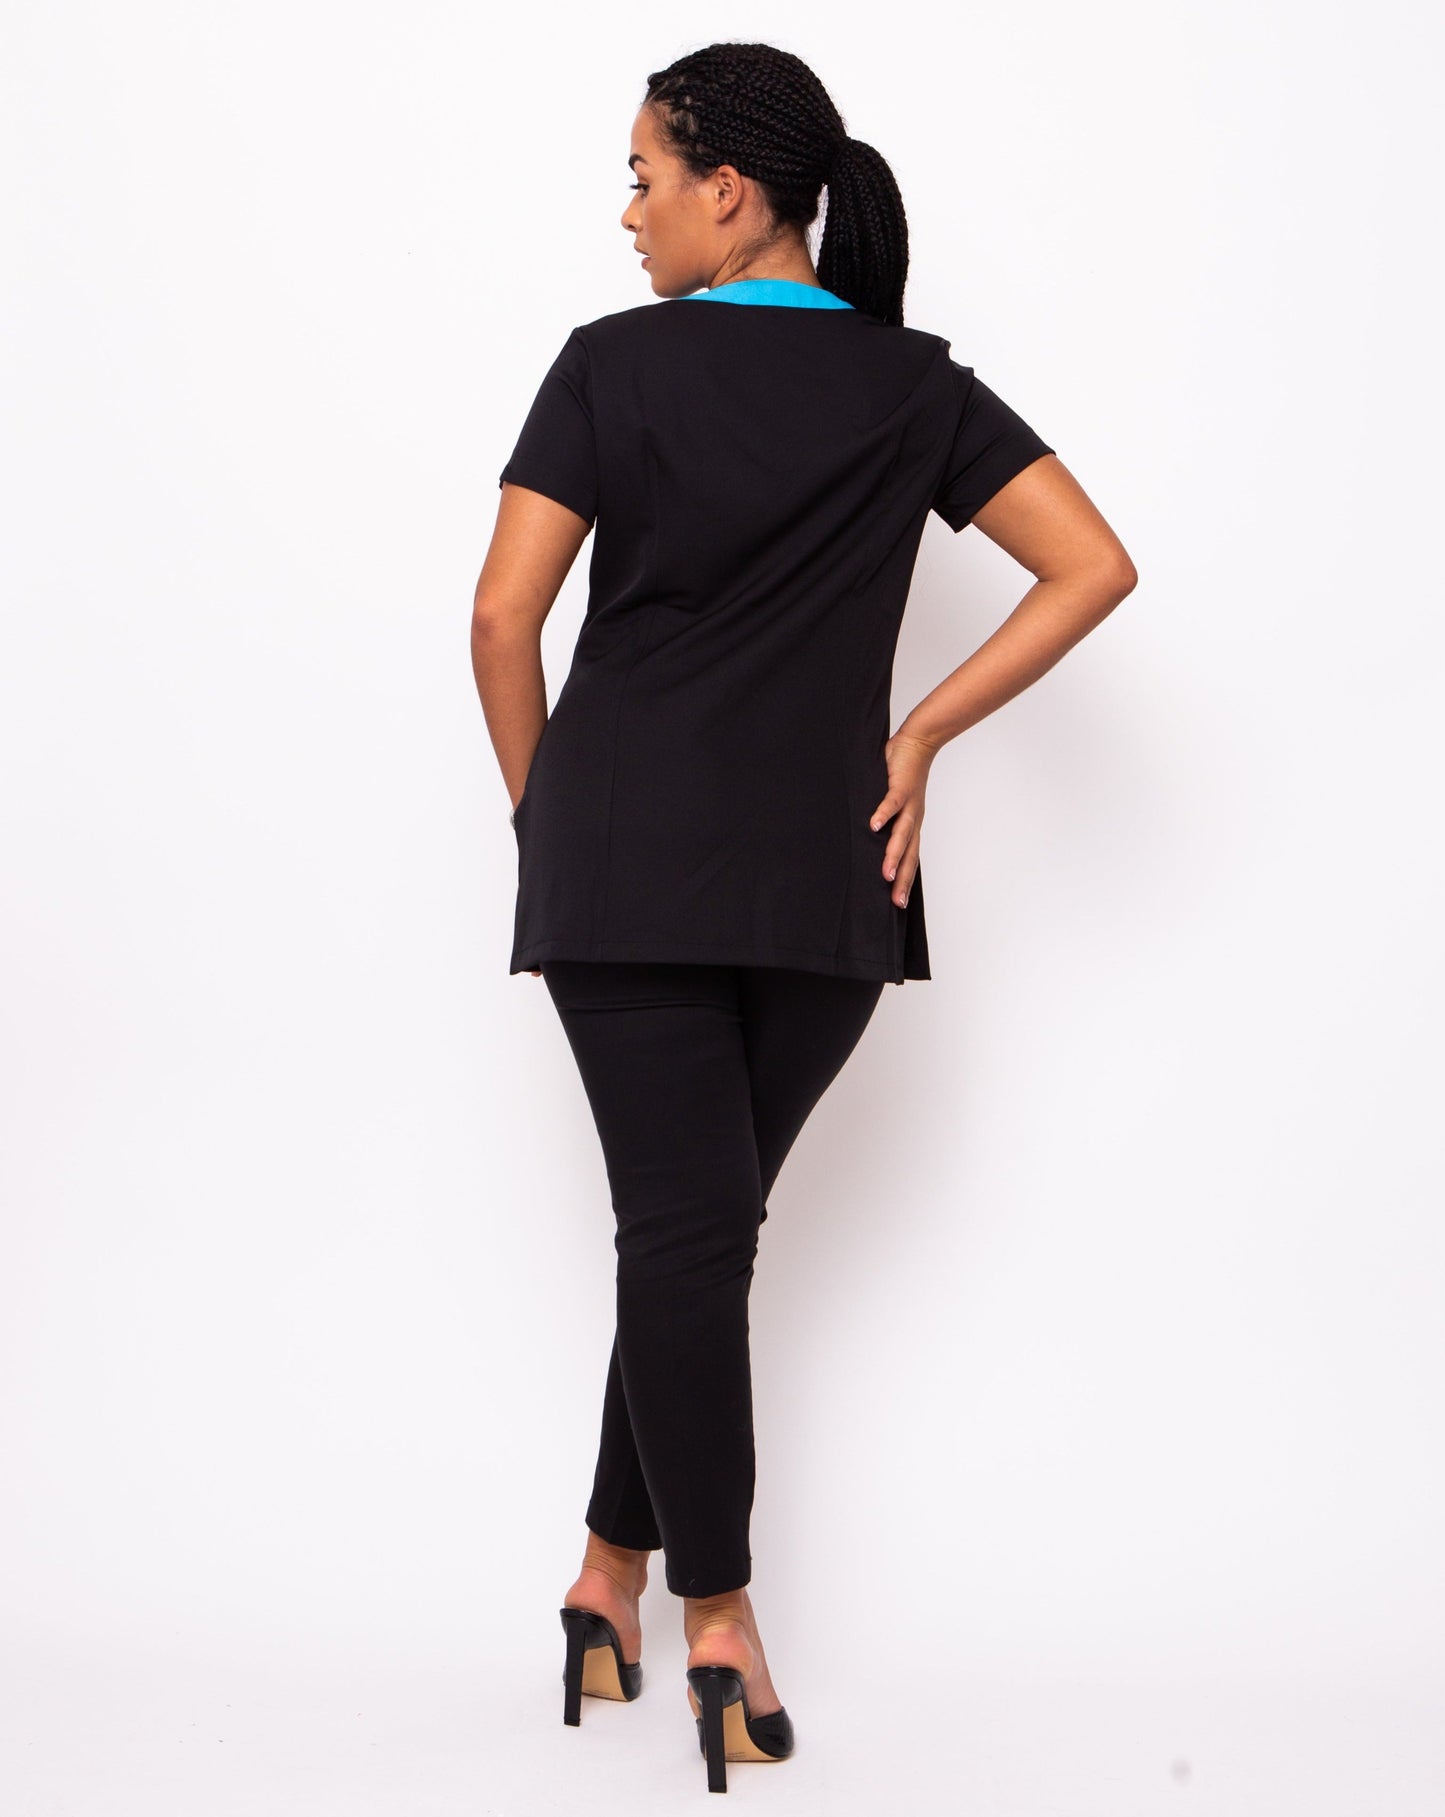 Black and teal beautician tunic